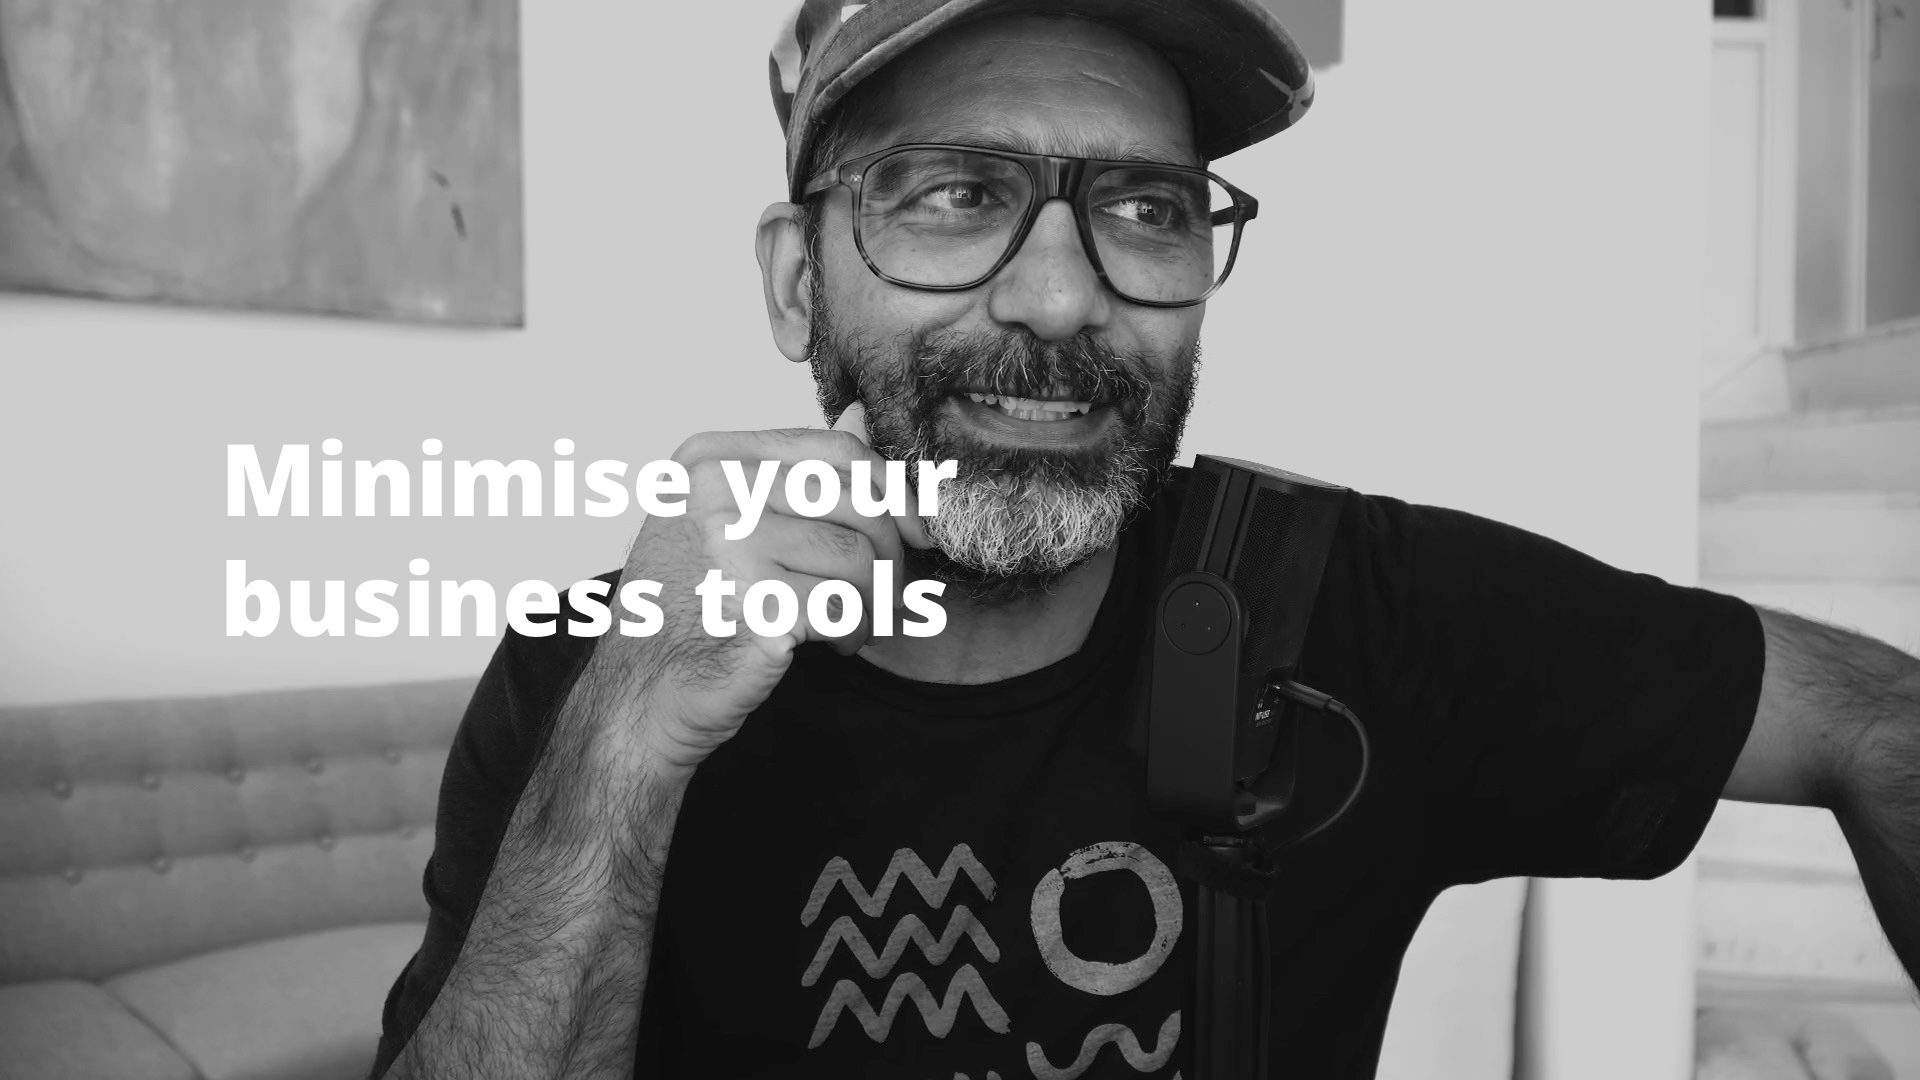 Minimise your business tools